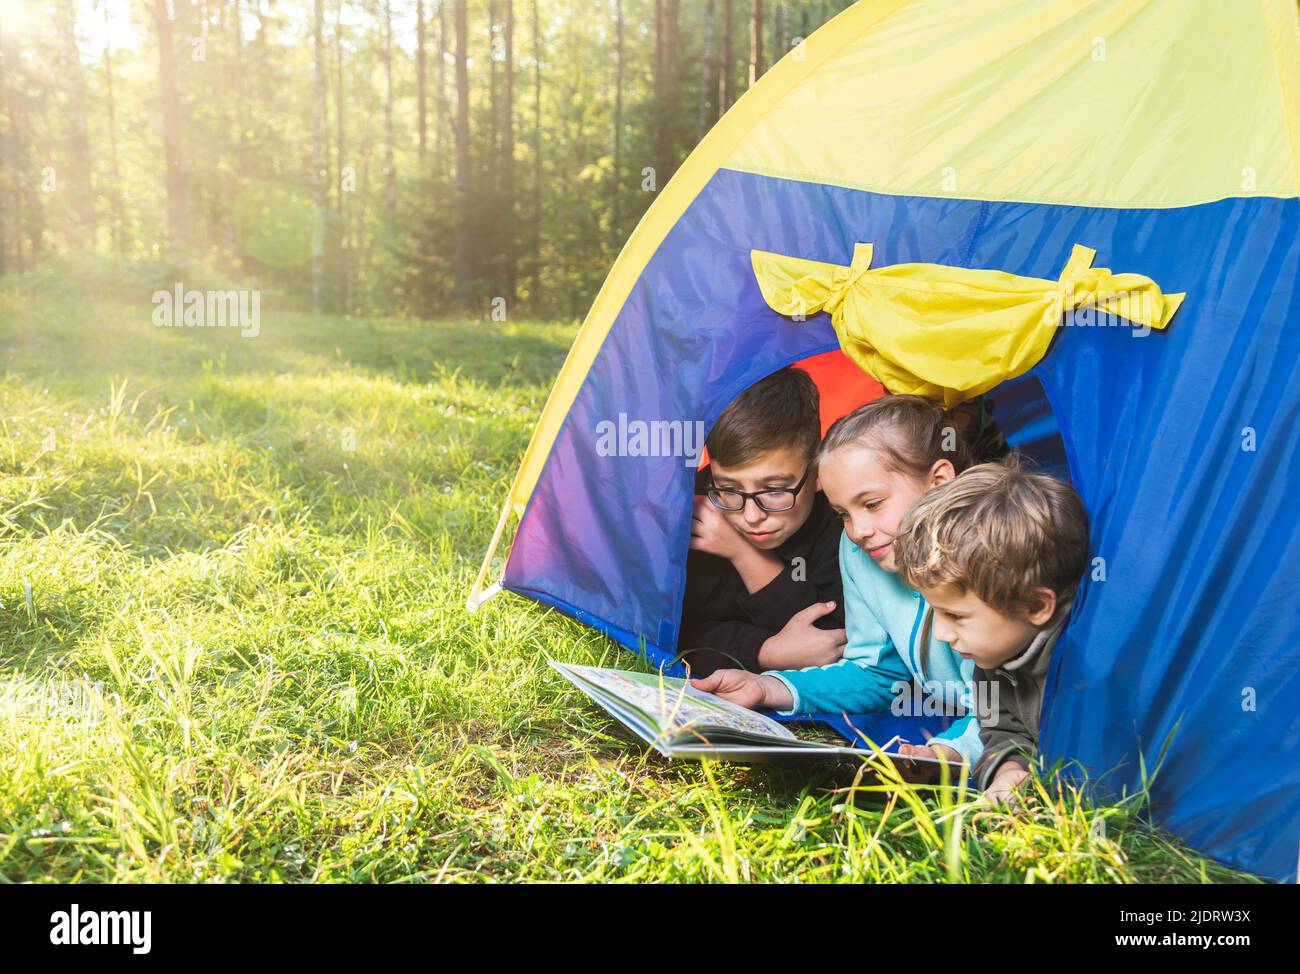 Children reading a book lying together in a tent on a sunny meadow enjoying summer forest camping. The sun shines through the trees. Family summer vac Stock Photo